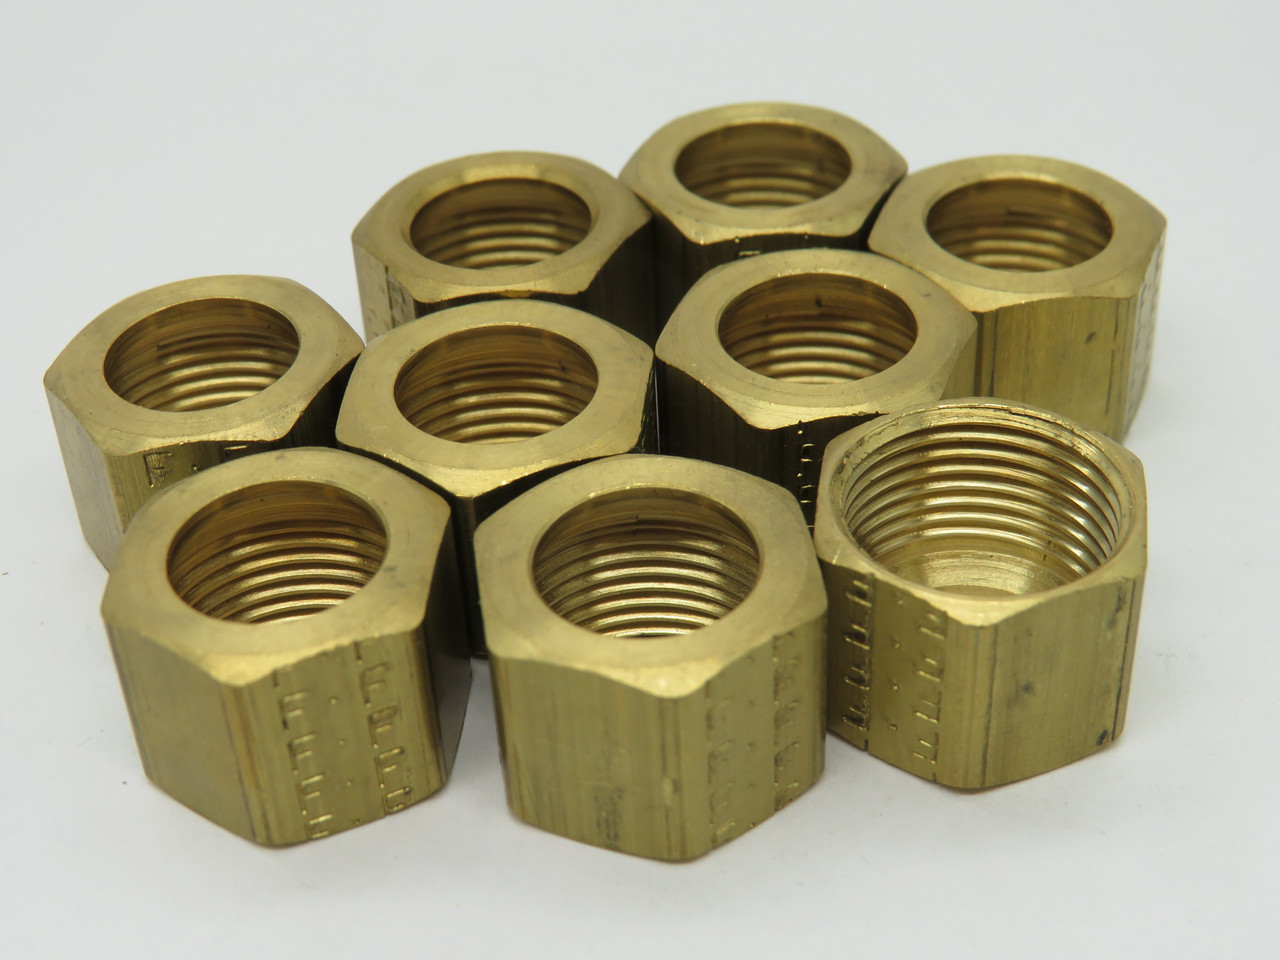 Fairview 61-8 Brass Compression Nut 1/2" Tube Lot of 9 USED